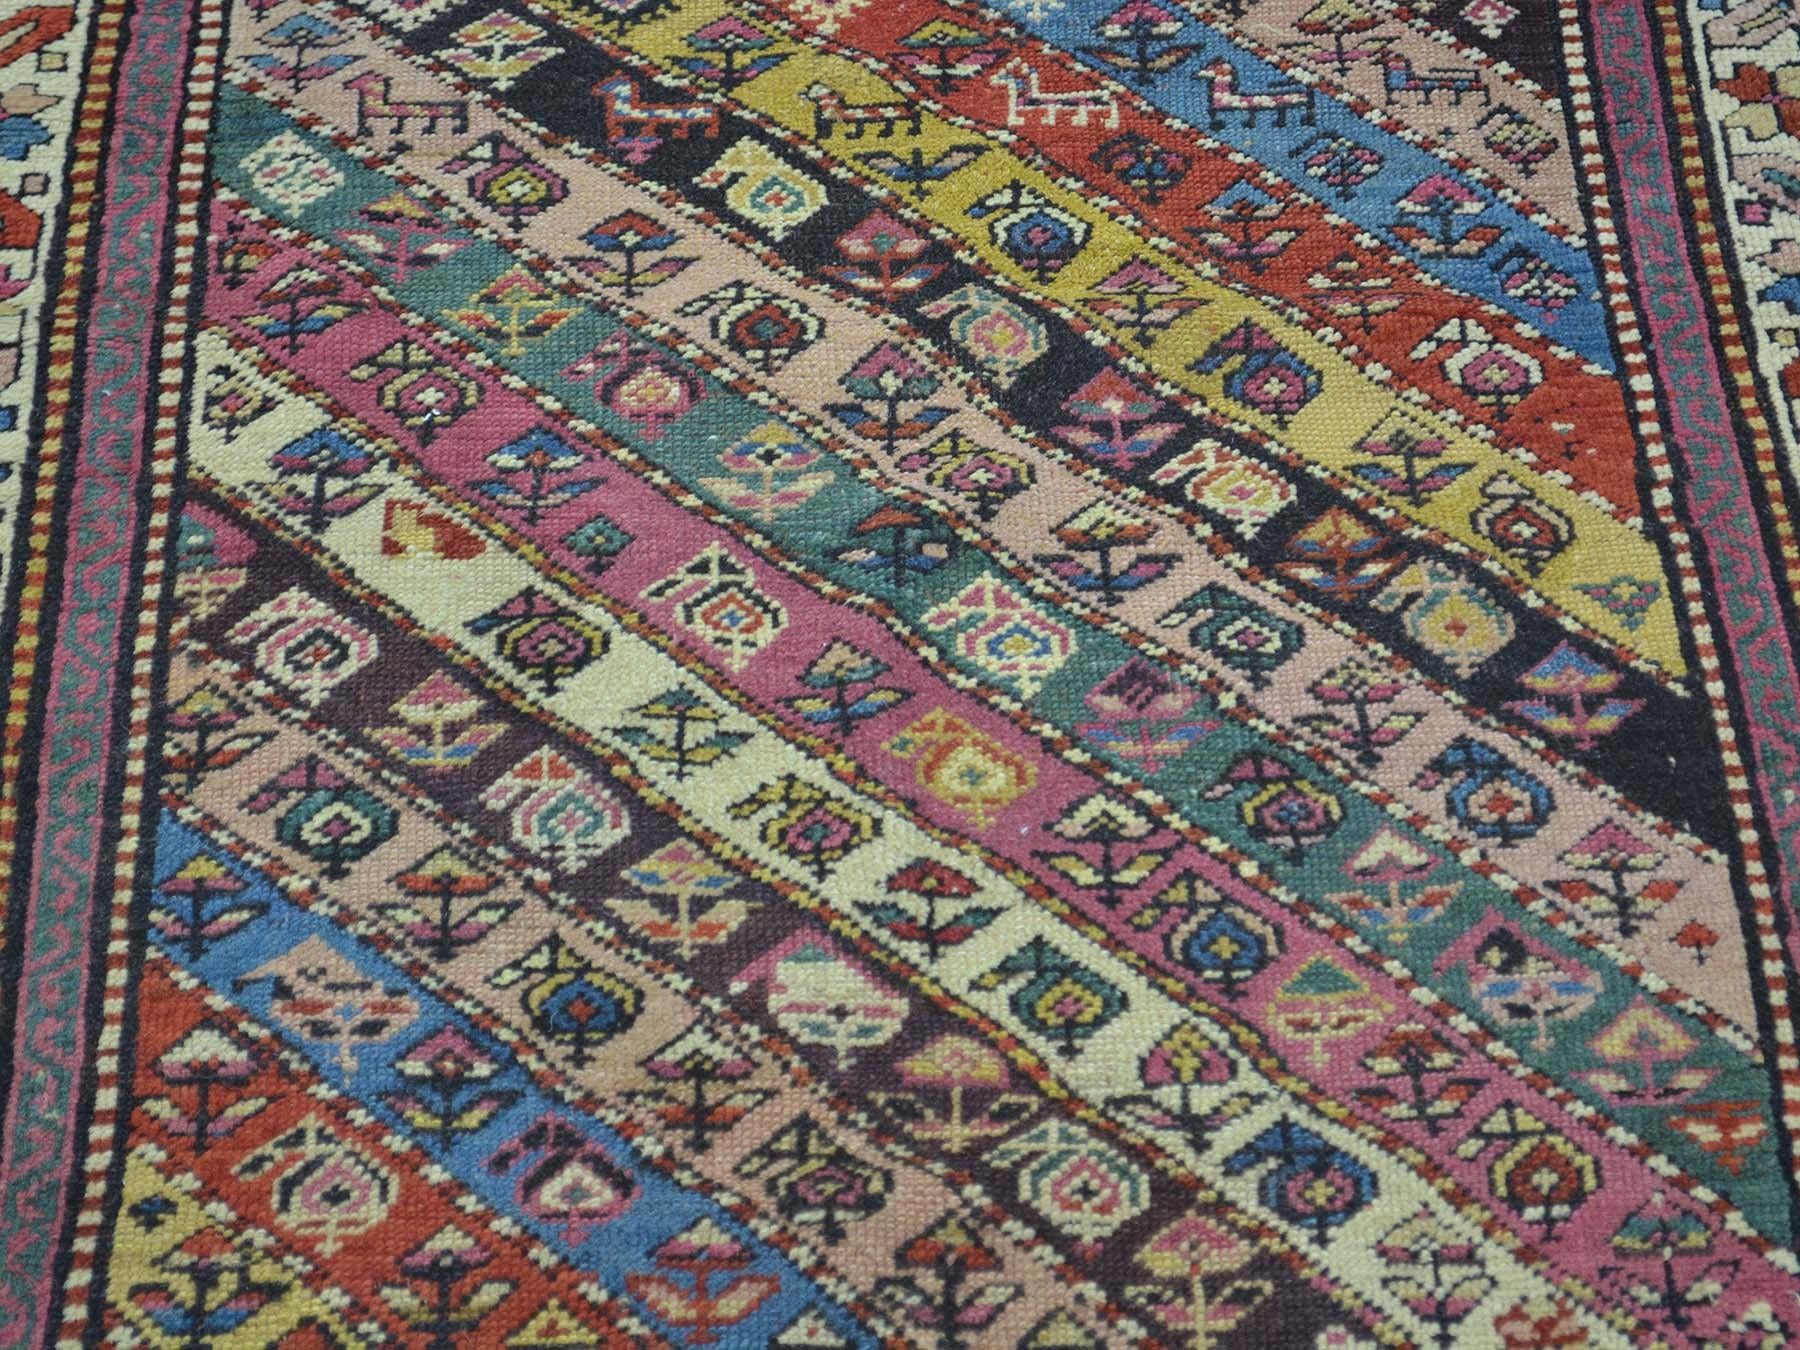 This is a genuine hand knotted Caucasian rug. It is not hand-tufted or machine made. Our entire inventory is made of either hand knotted or handwoven rugs. 

Renovate your home style with this charming antique carpet. This handcrafted Caucasian